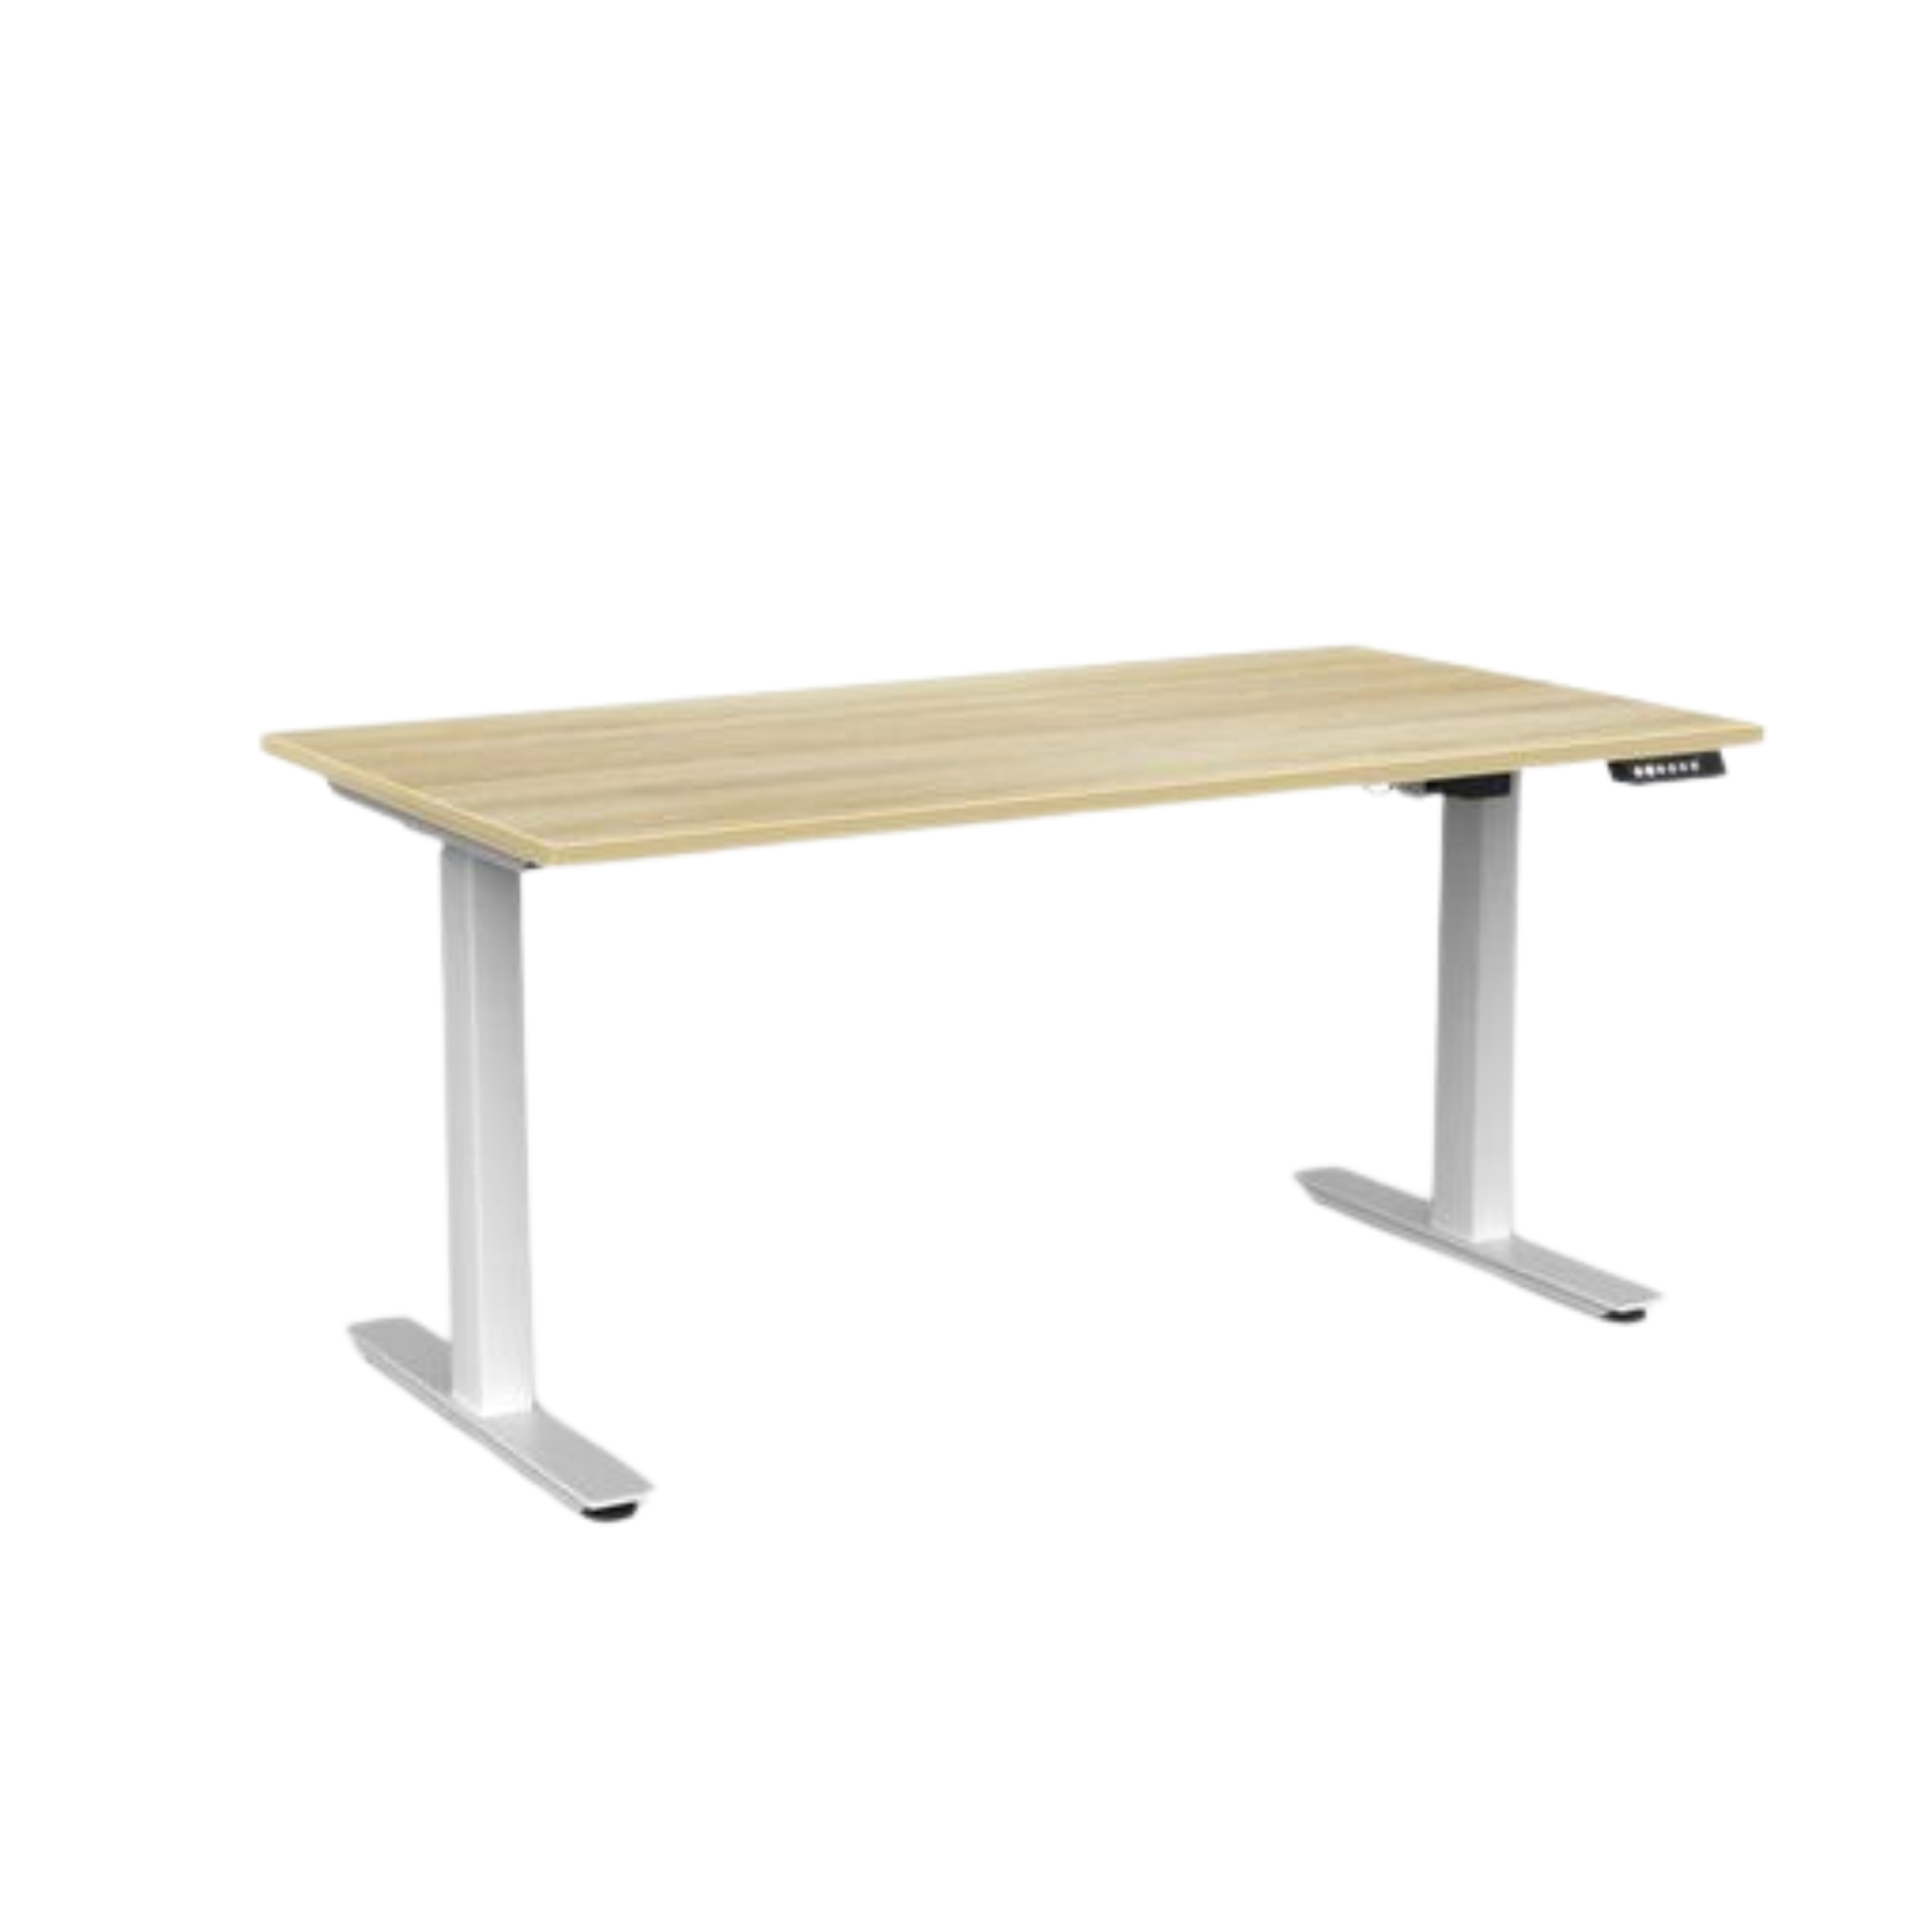 Agile 2 electric sit to stand desk with white frame and atlantic oak top